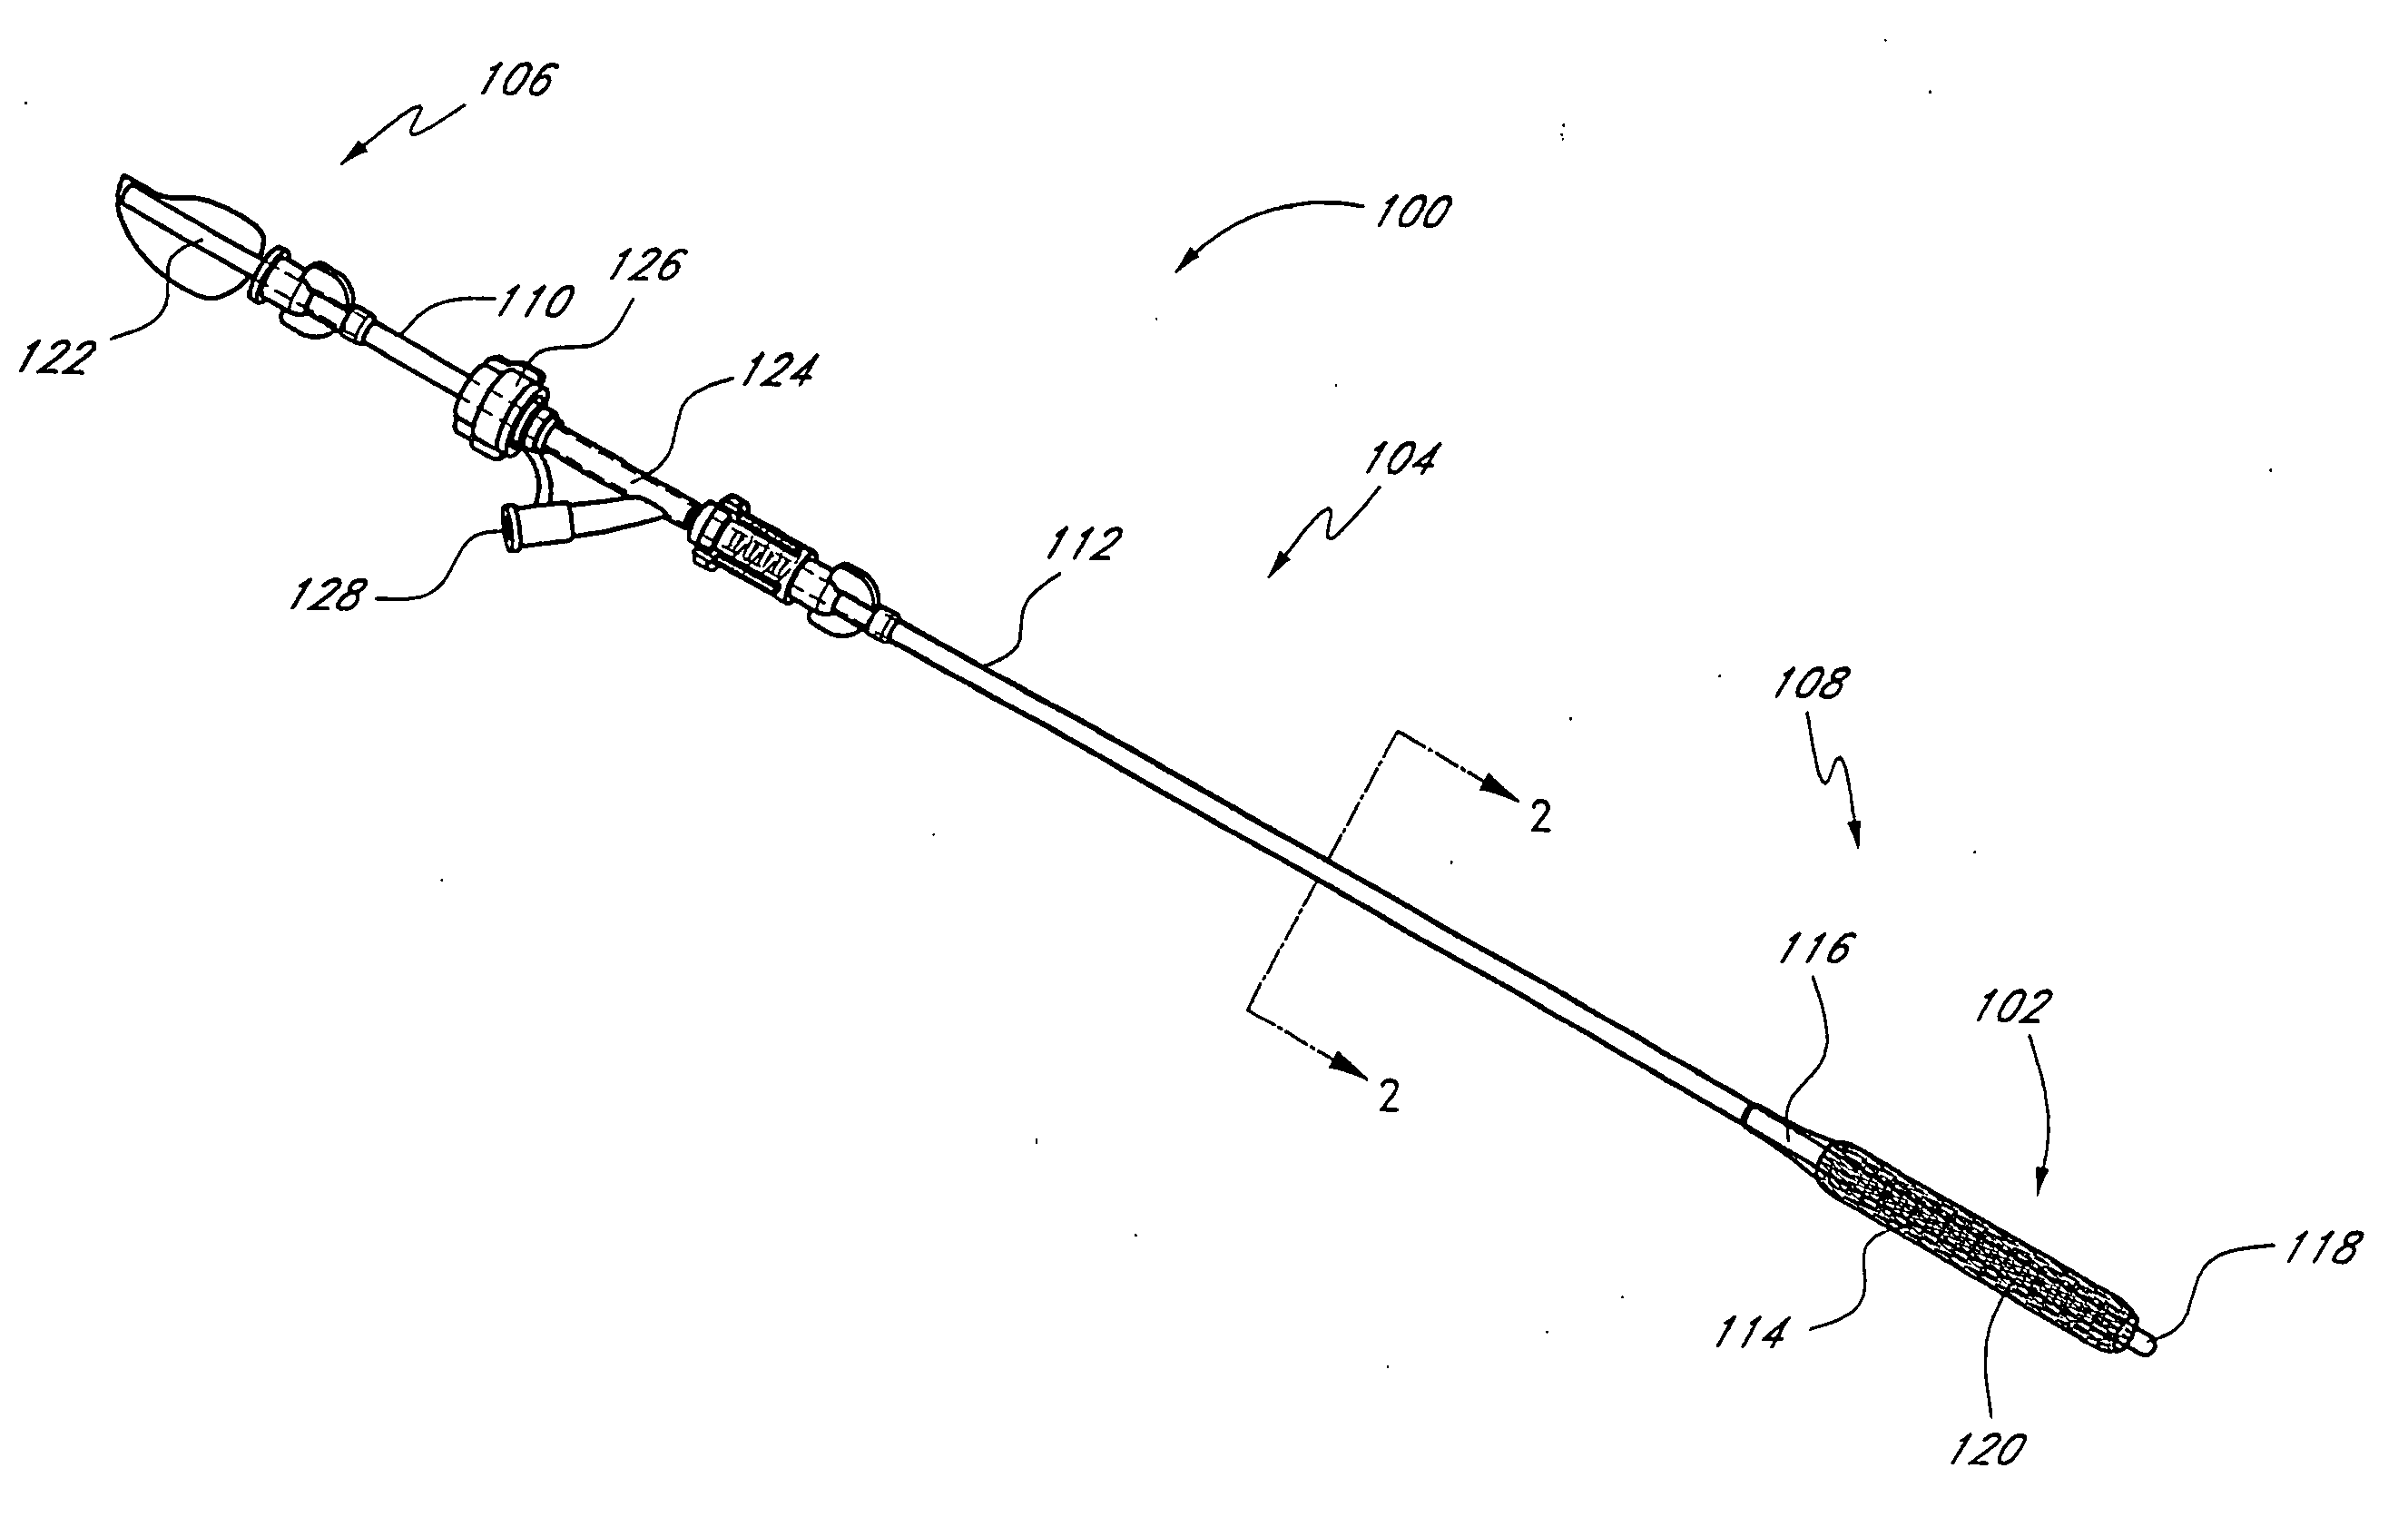 Formed in place fixation system with thermal acceleration